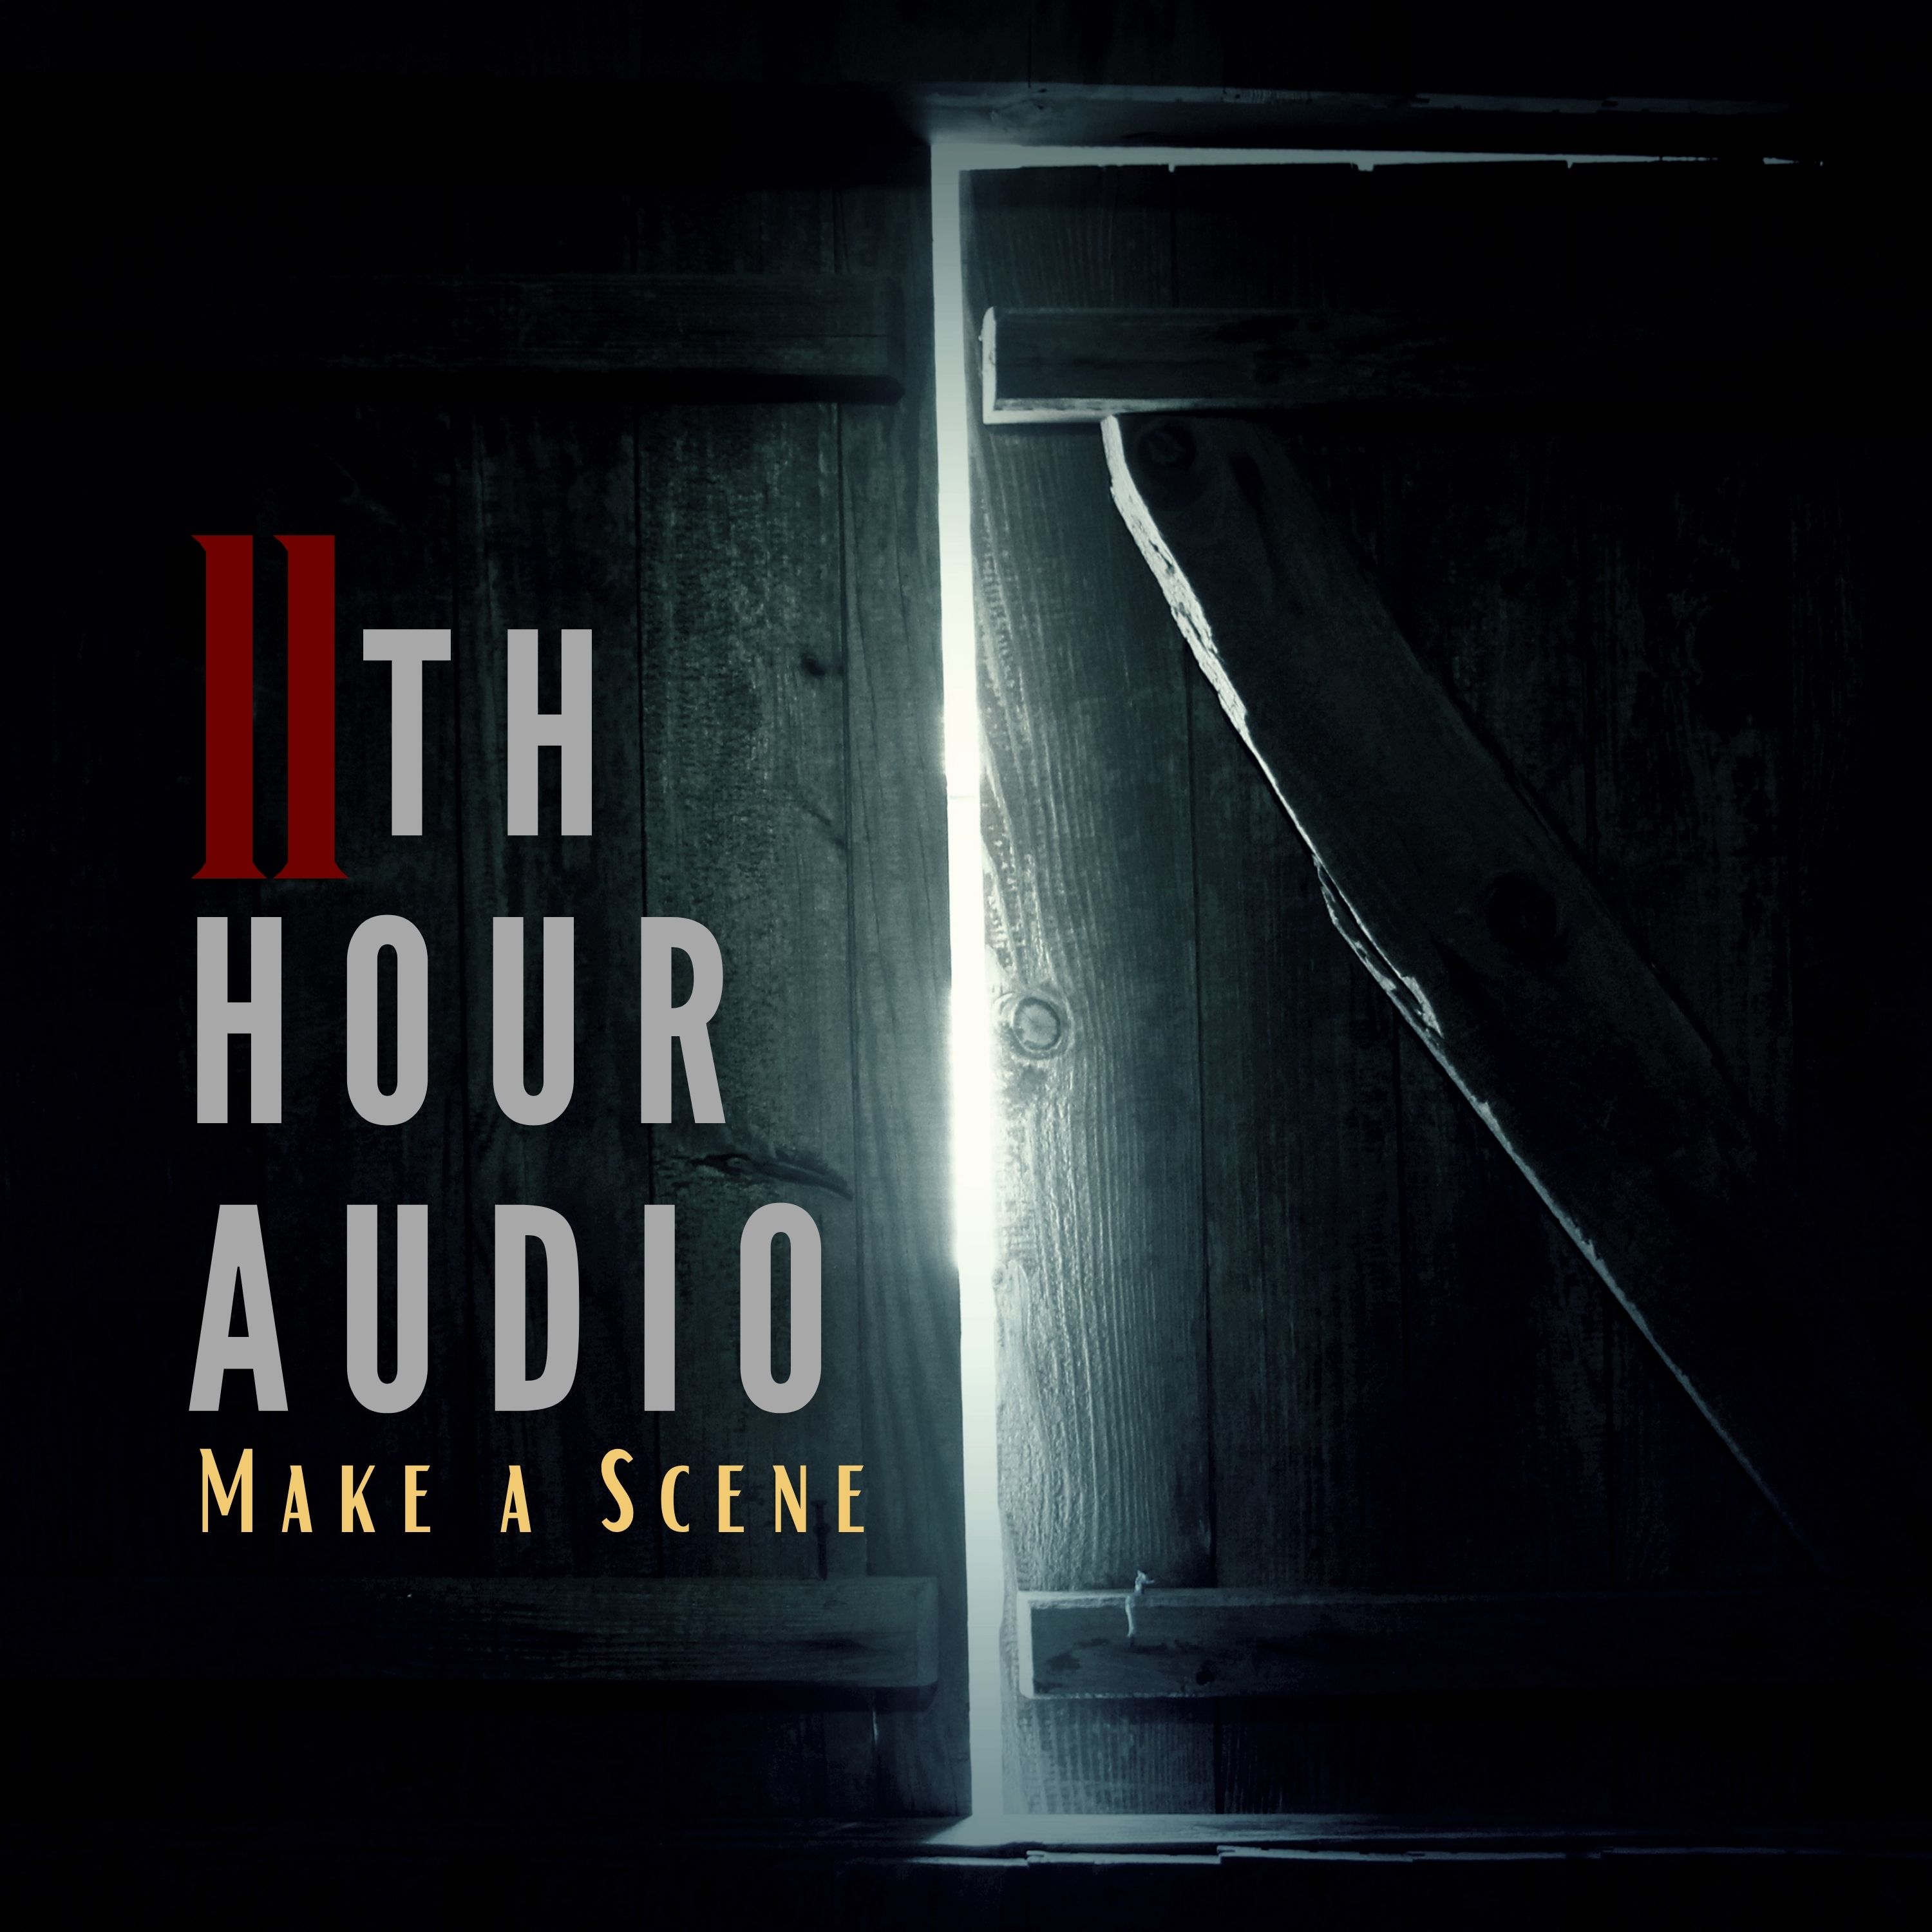 The 11th Hour Audio Challenge 2021